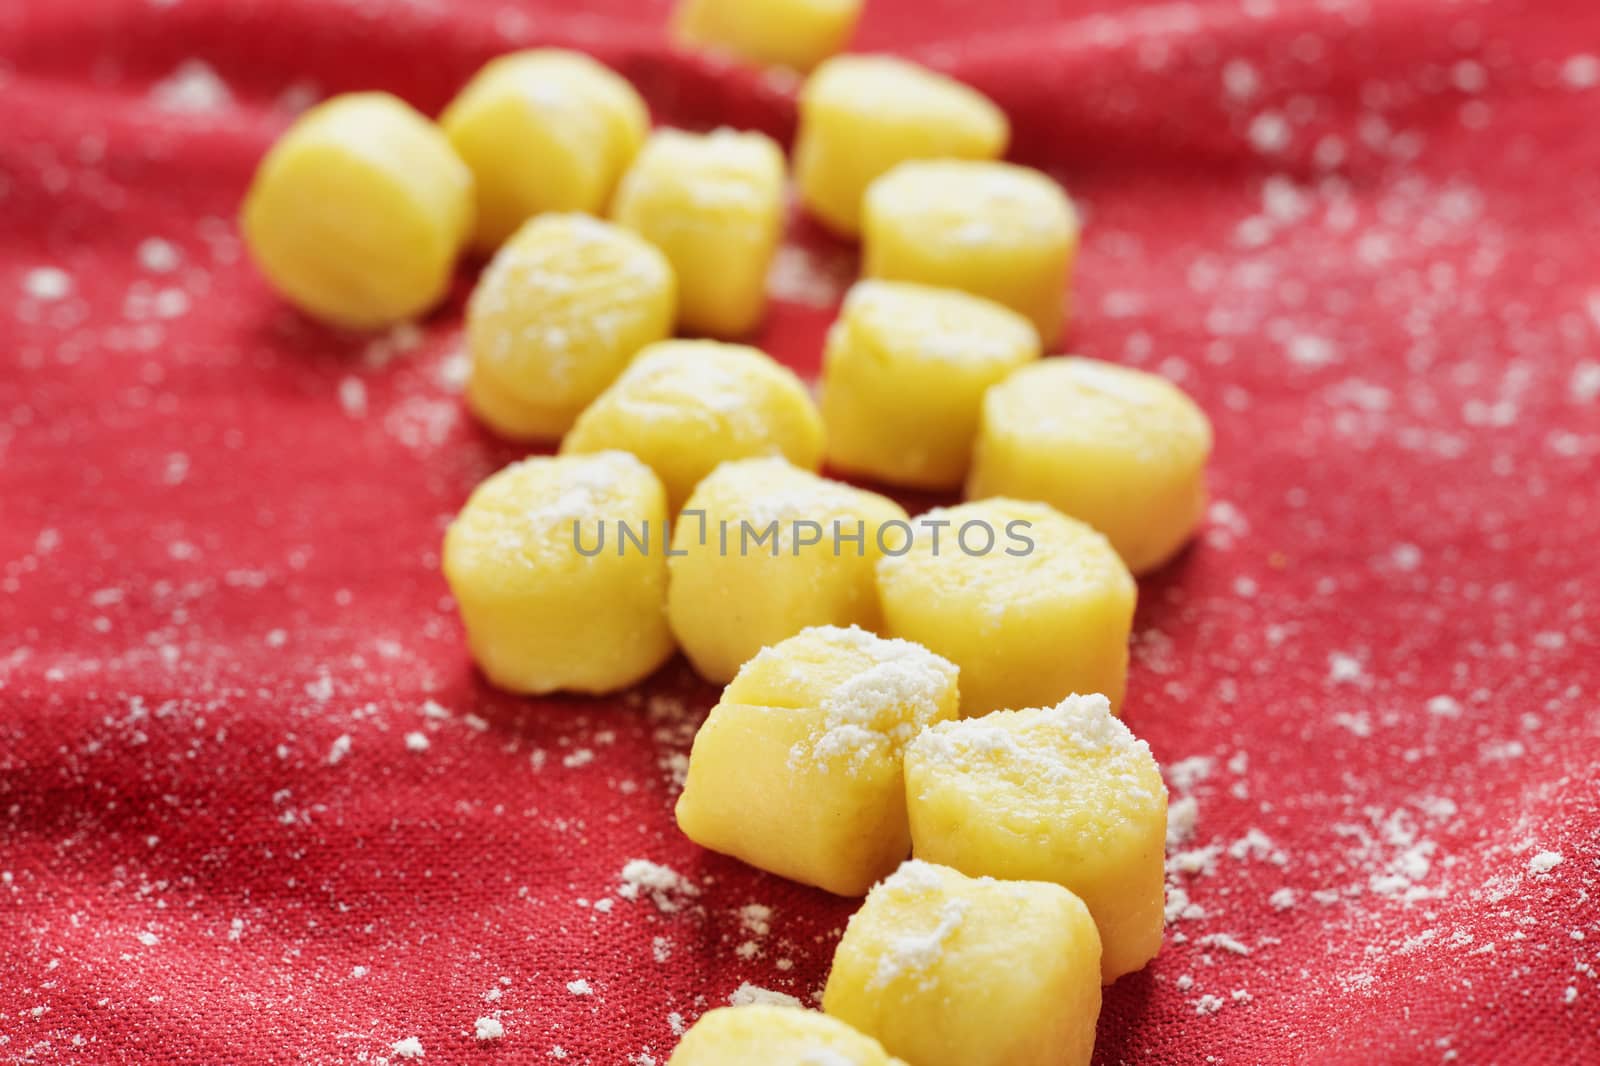 Tasty thick  and small handmade gnocchi -dough dumplings - on red cloth ,it’s a variety of pasta made with semolina wheat flour and egg